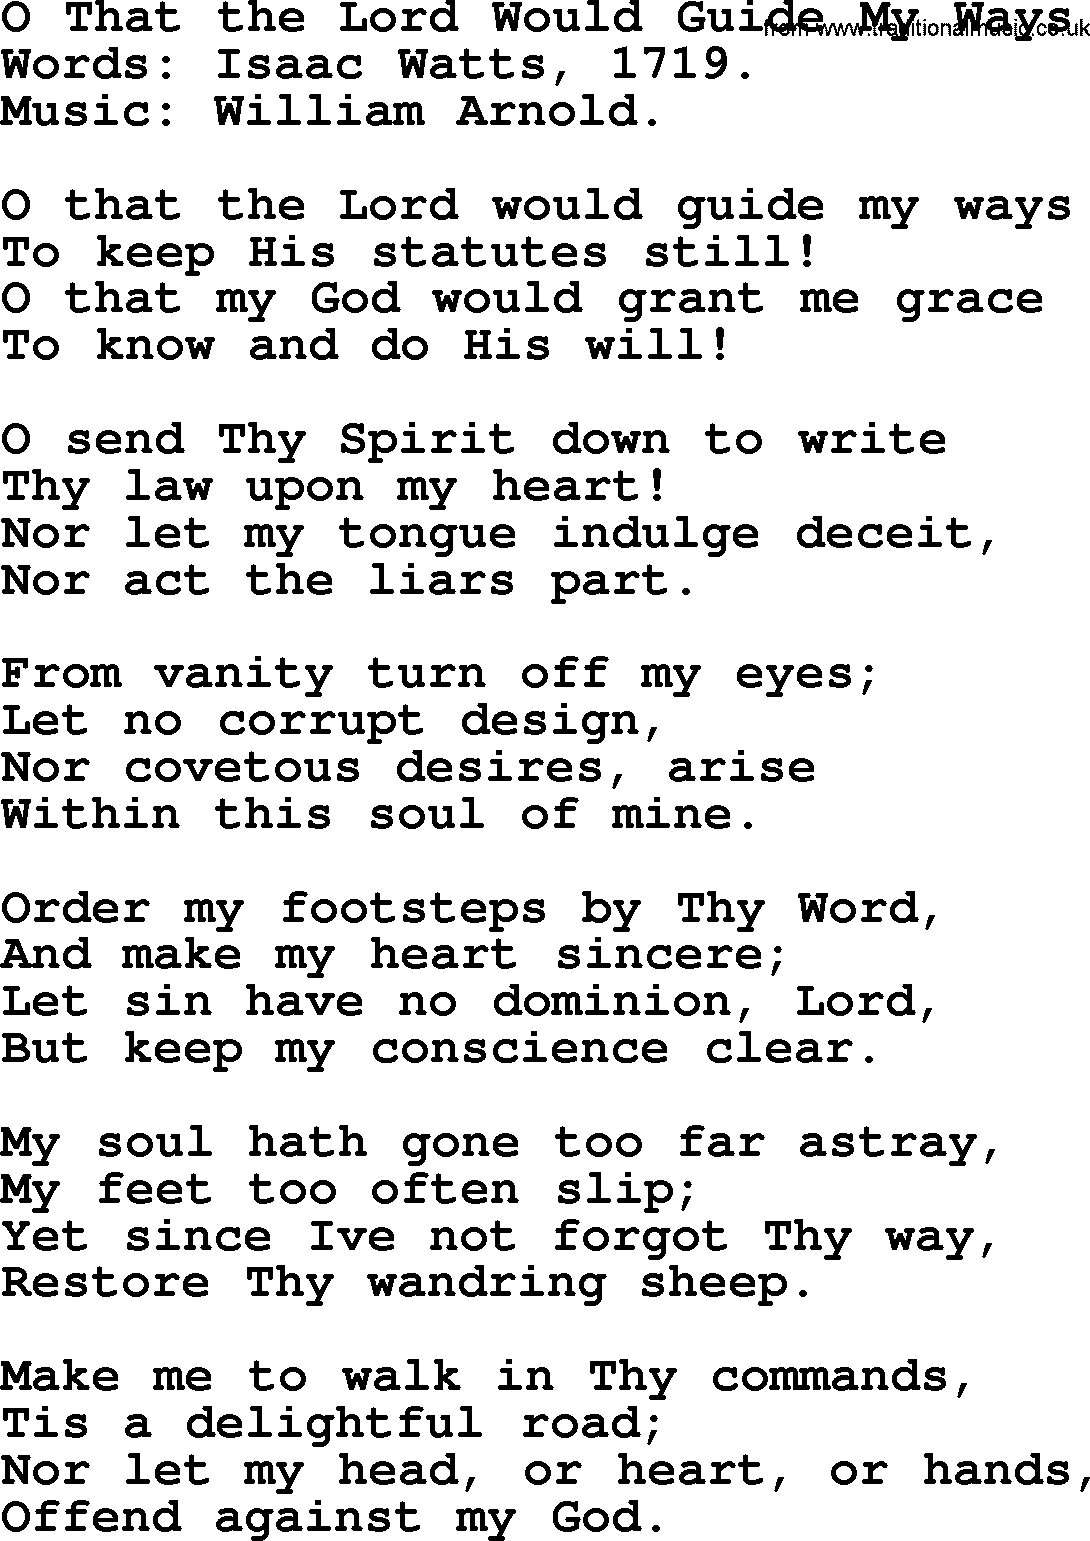 Isaac Watts Christian hymn: O That the Lord Would Guide My Ways- lyricss